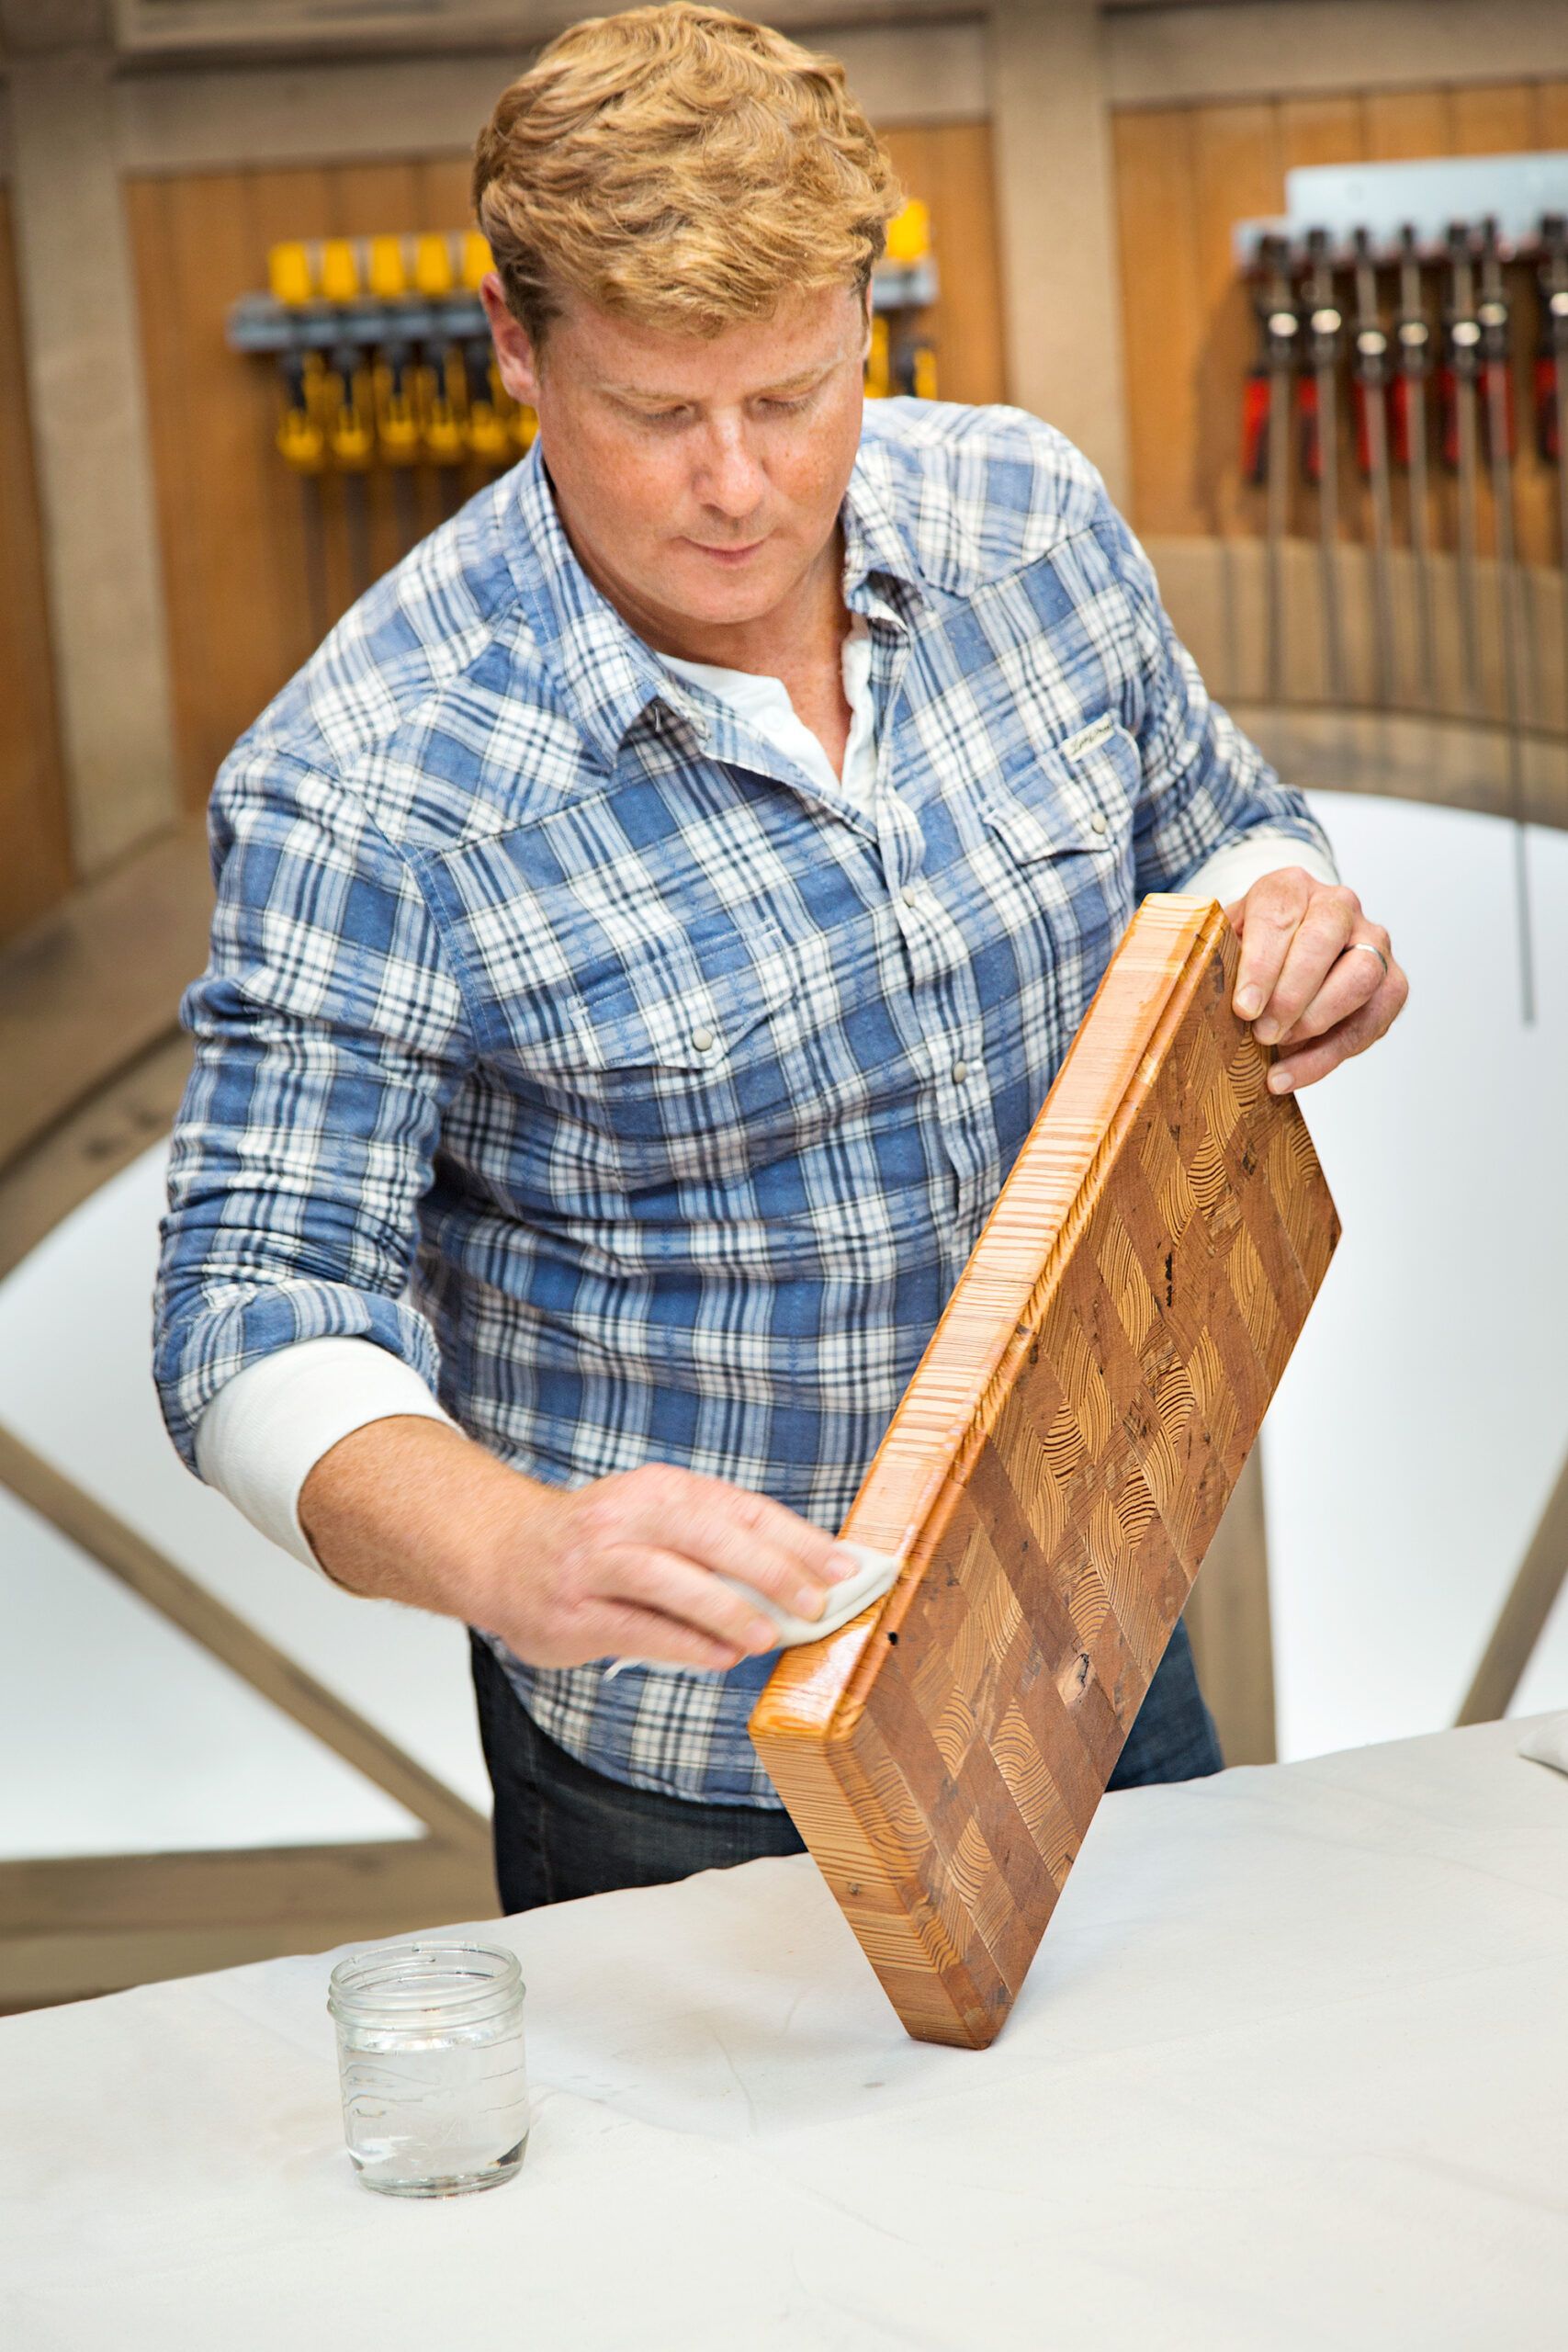 How to Make a Large Cutting Board 